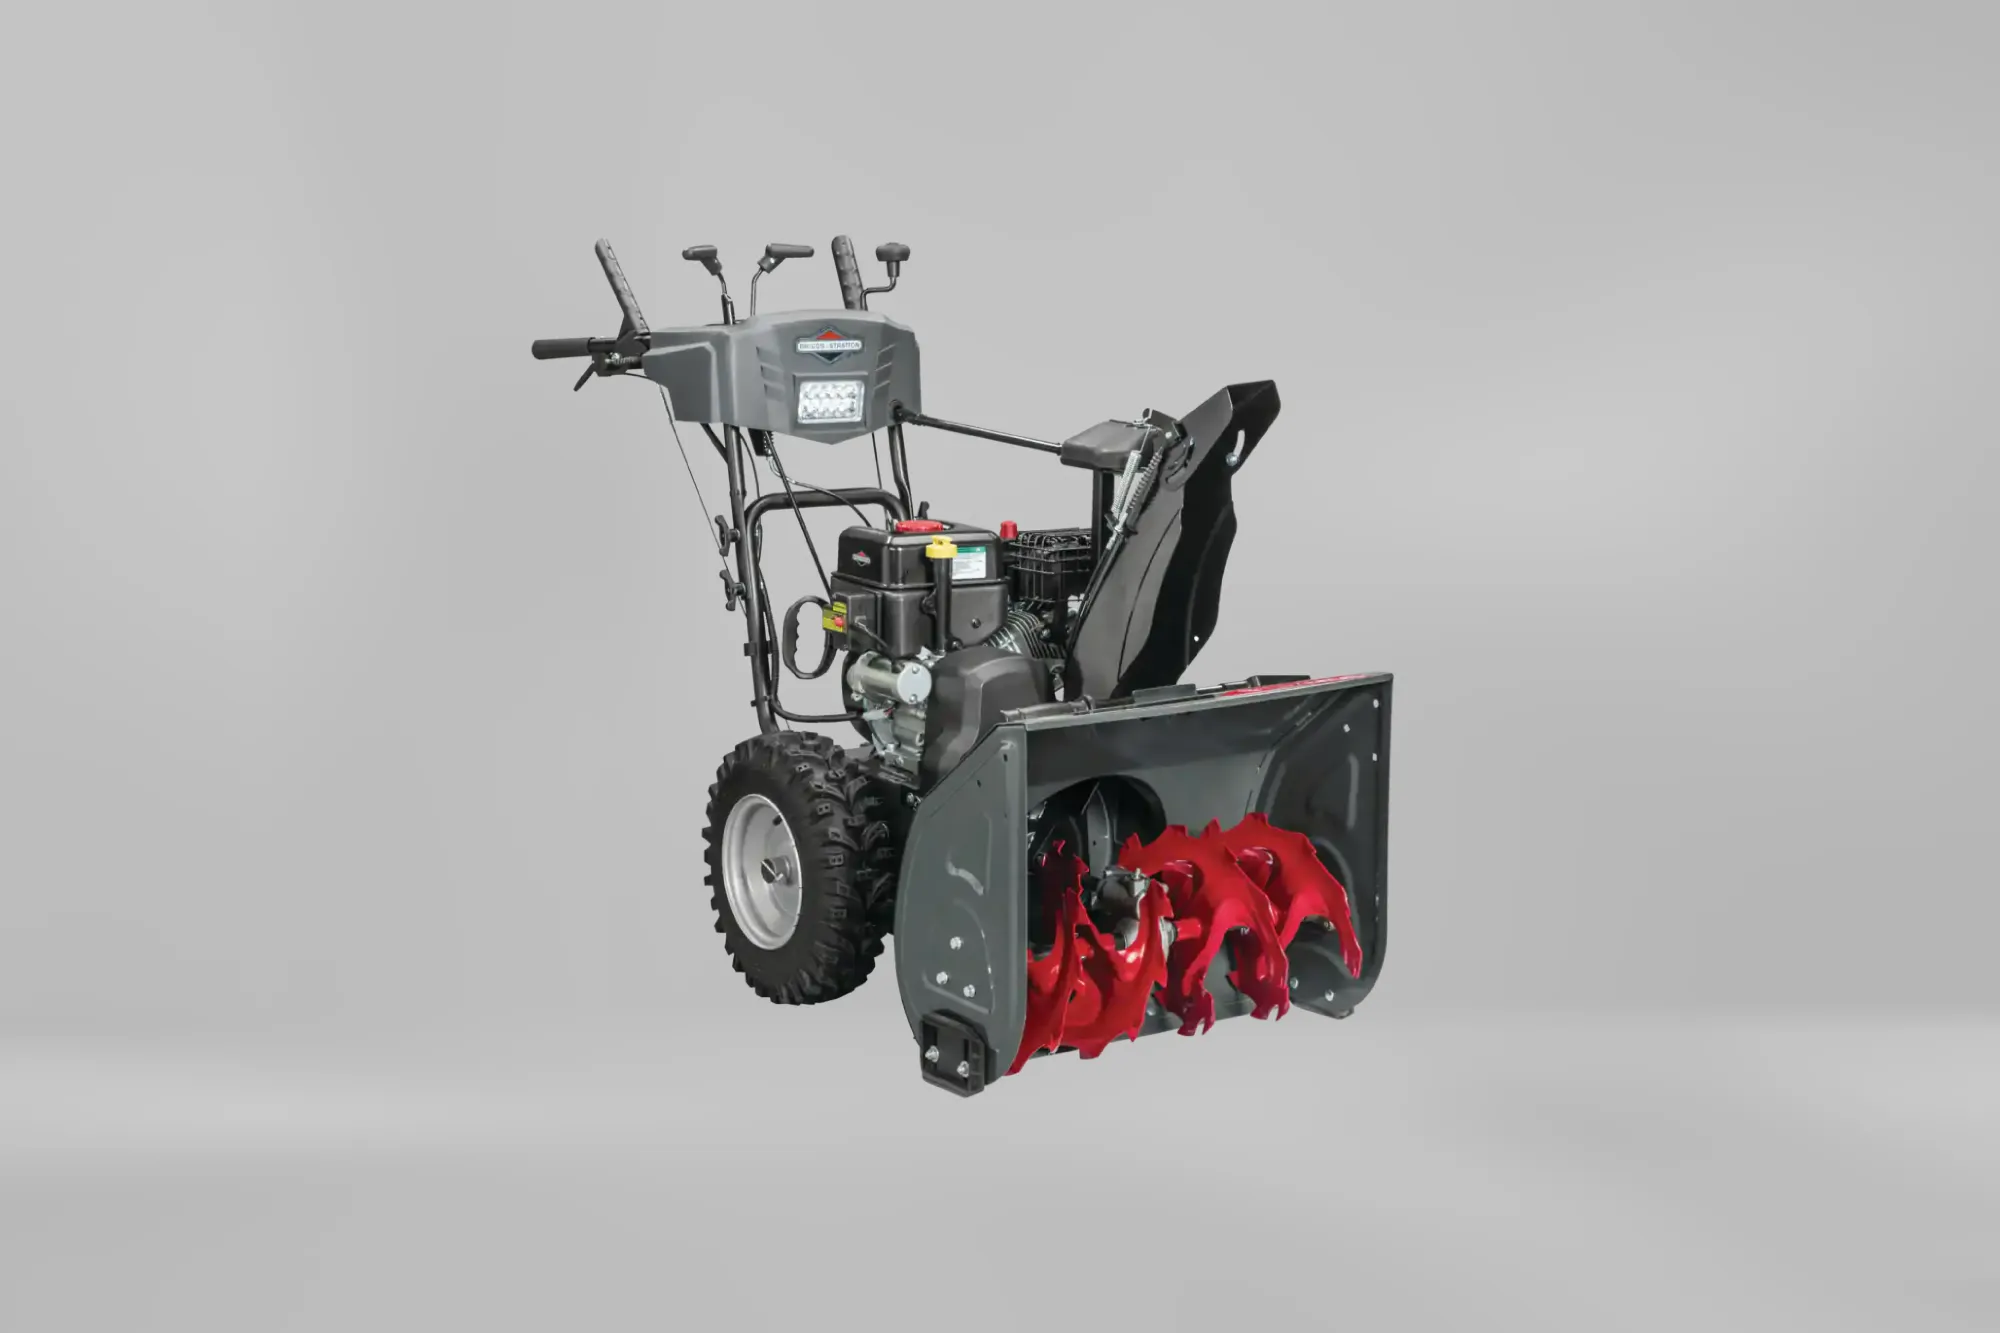 Best Snow Blowers Under $1000 for Heavy Snowfall